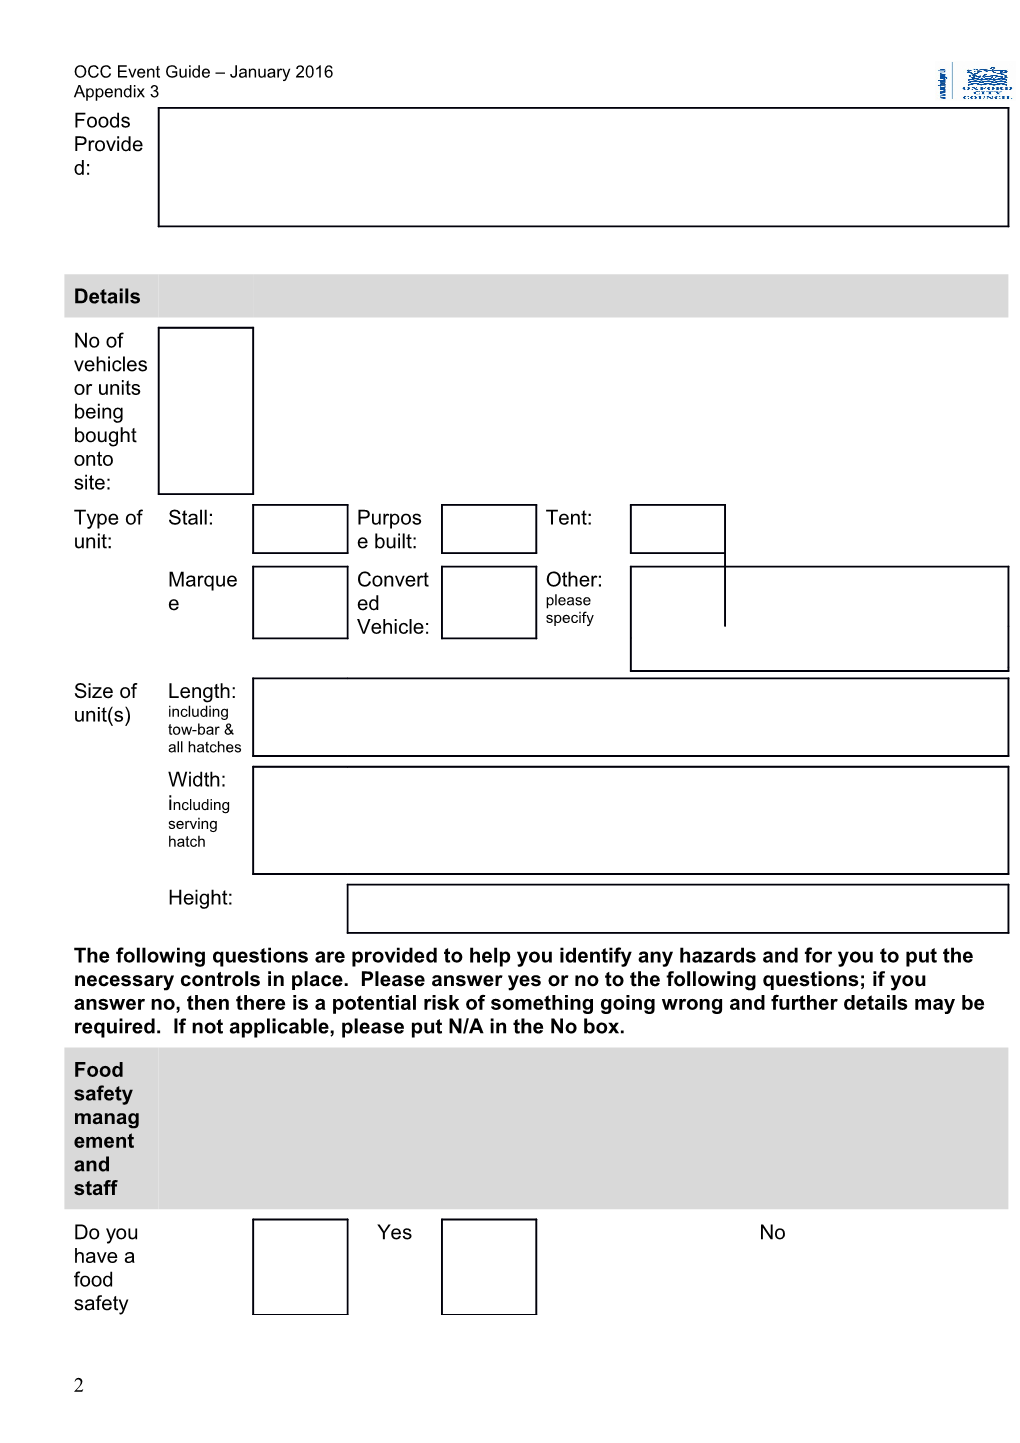 Event Catering Form